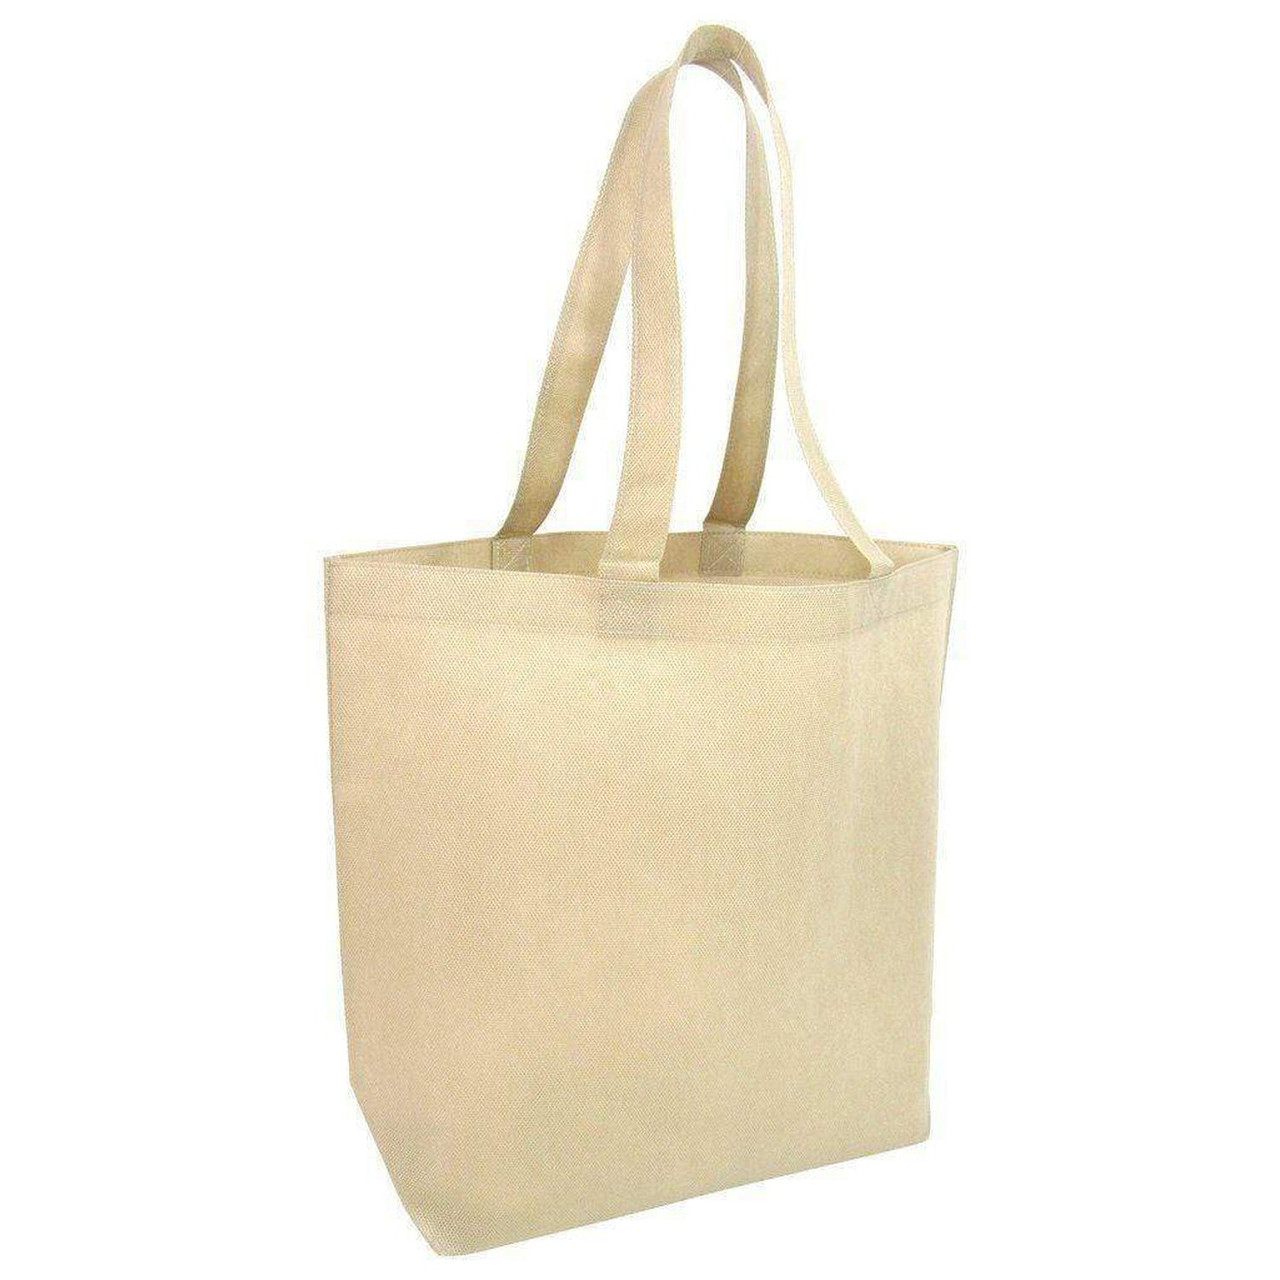 Promotional Non-Woven Large Size Tote Bags with Bottom Gusset - NTB25